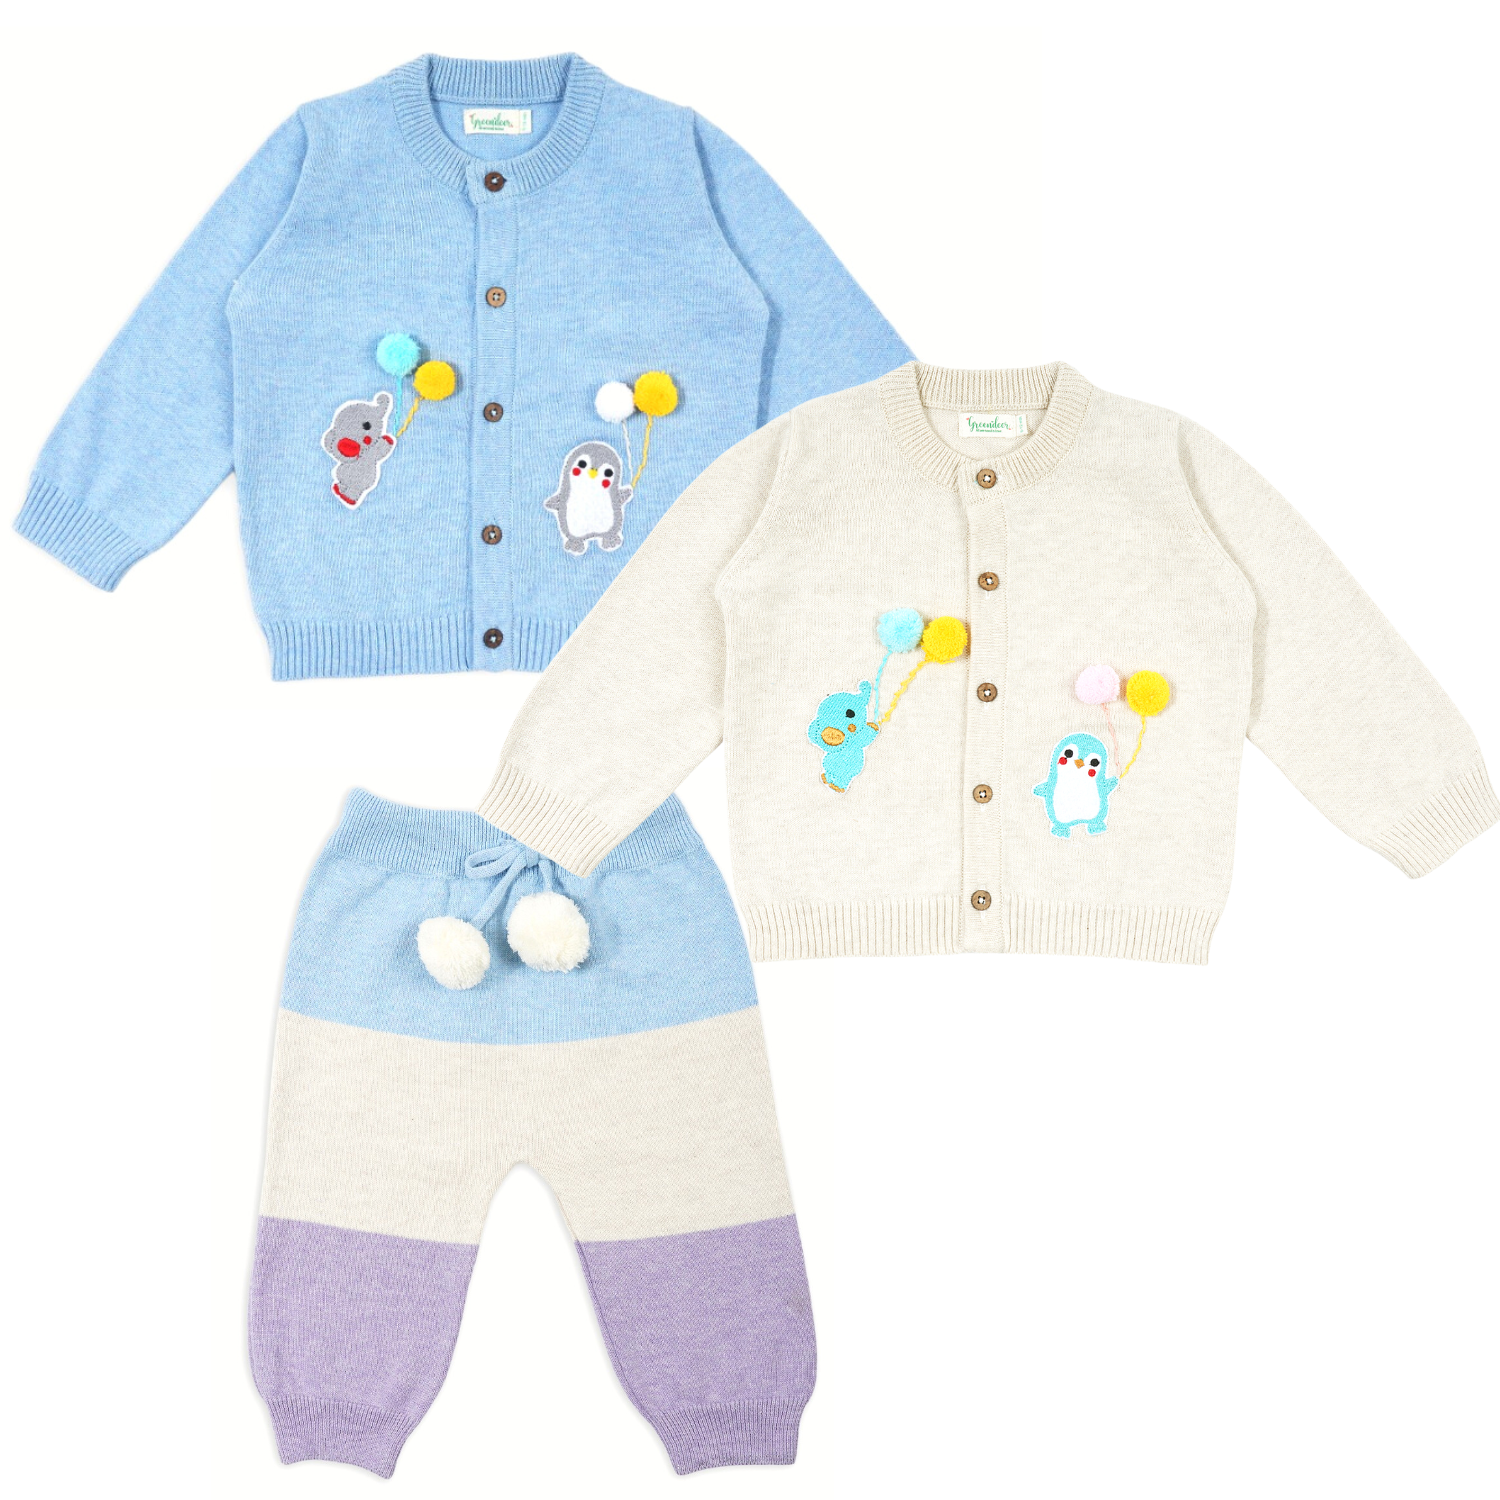 Blue and Organic White Happy Ballon Sweater and Lower Combo Set of 3